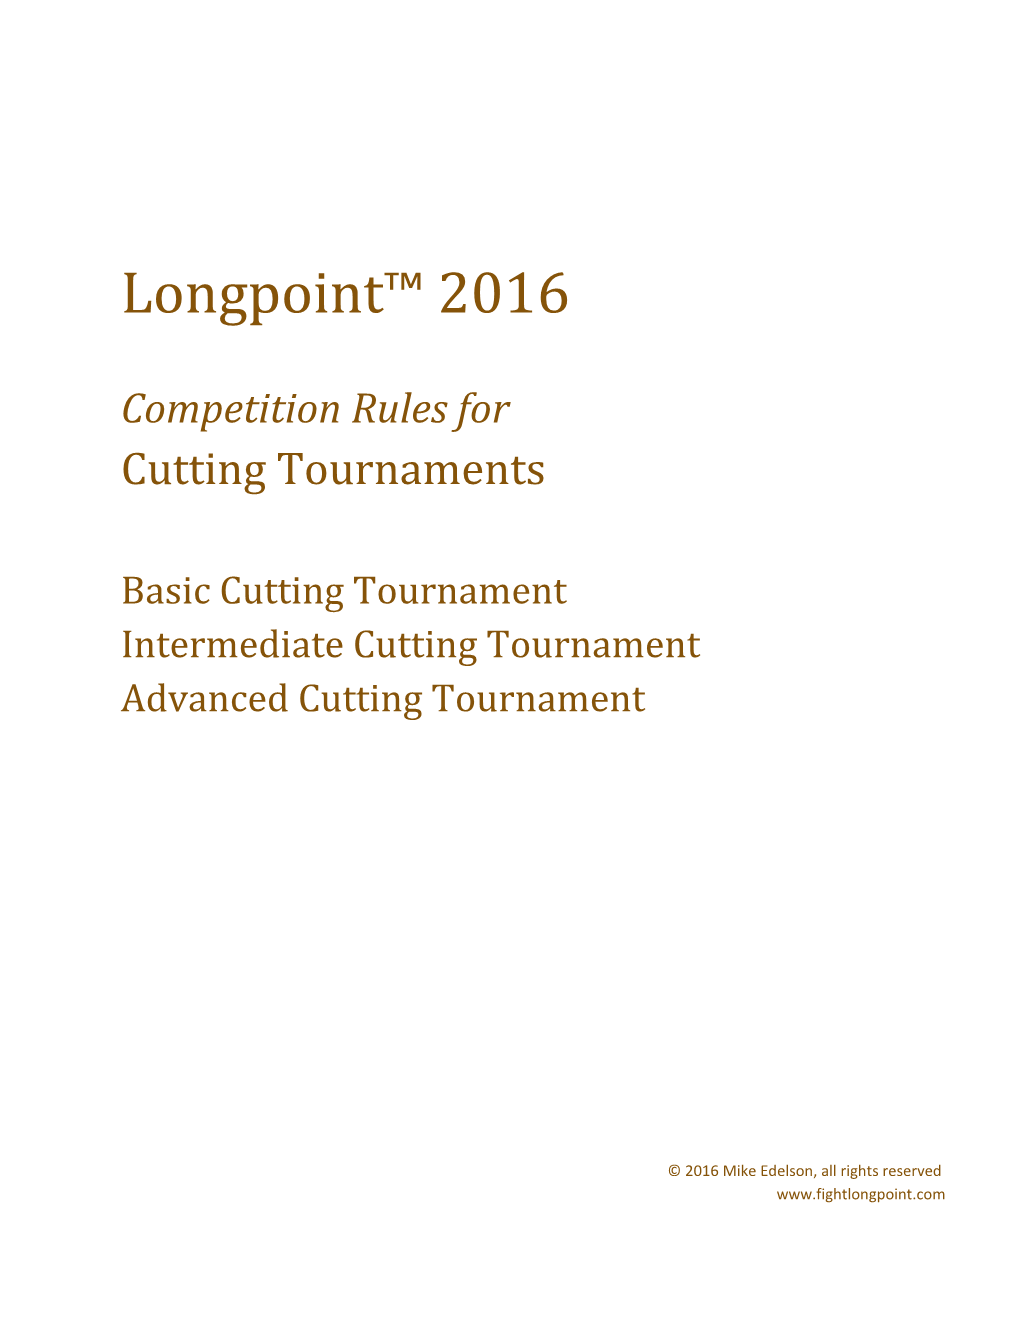 Longpoint 2016 Competition Rules